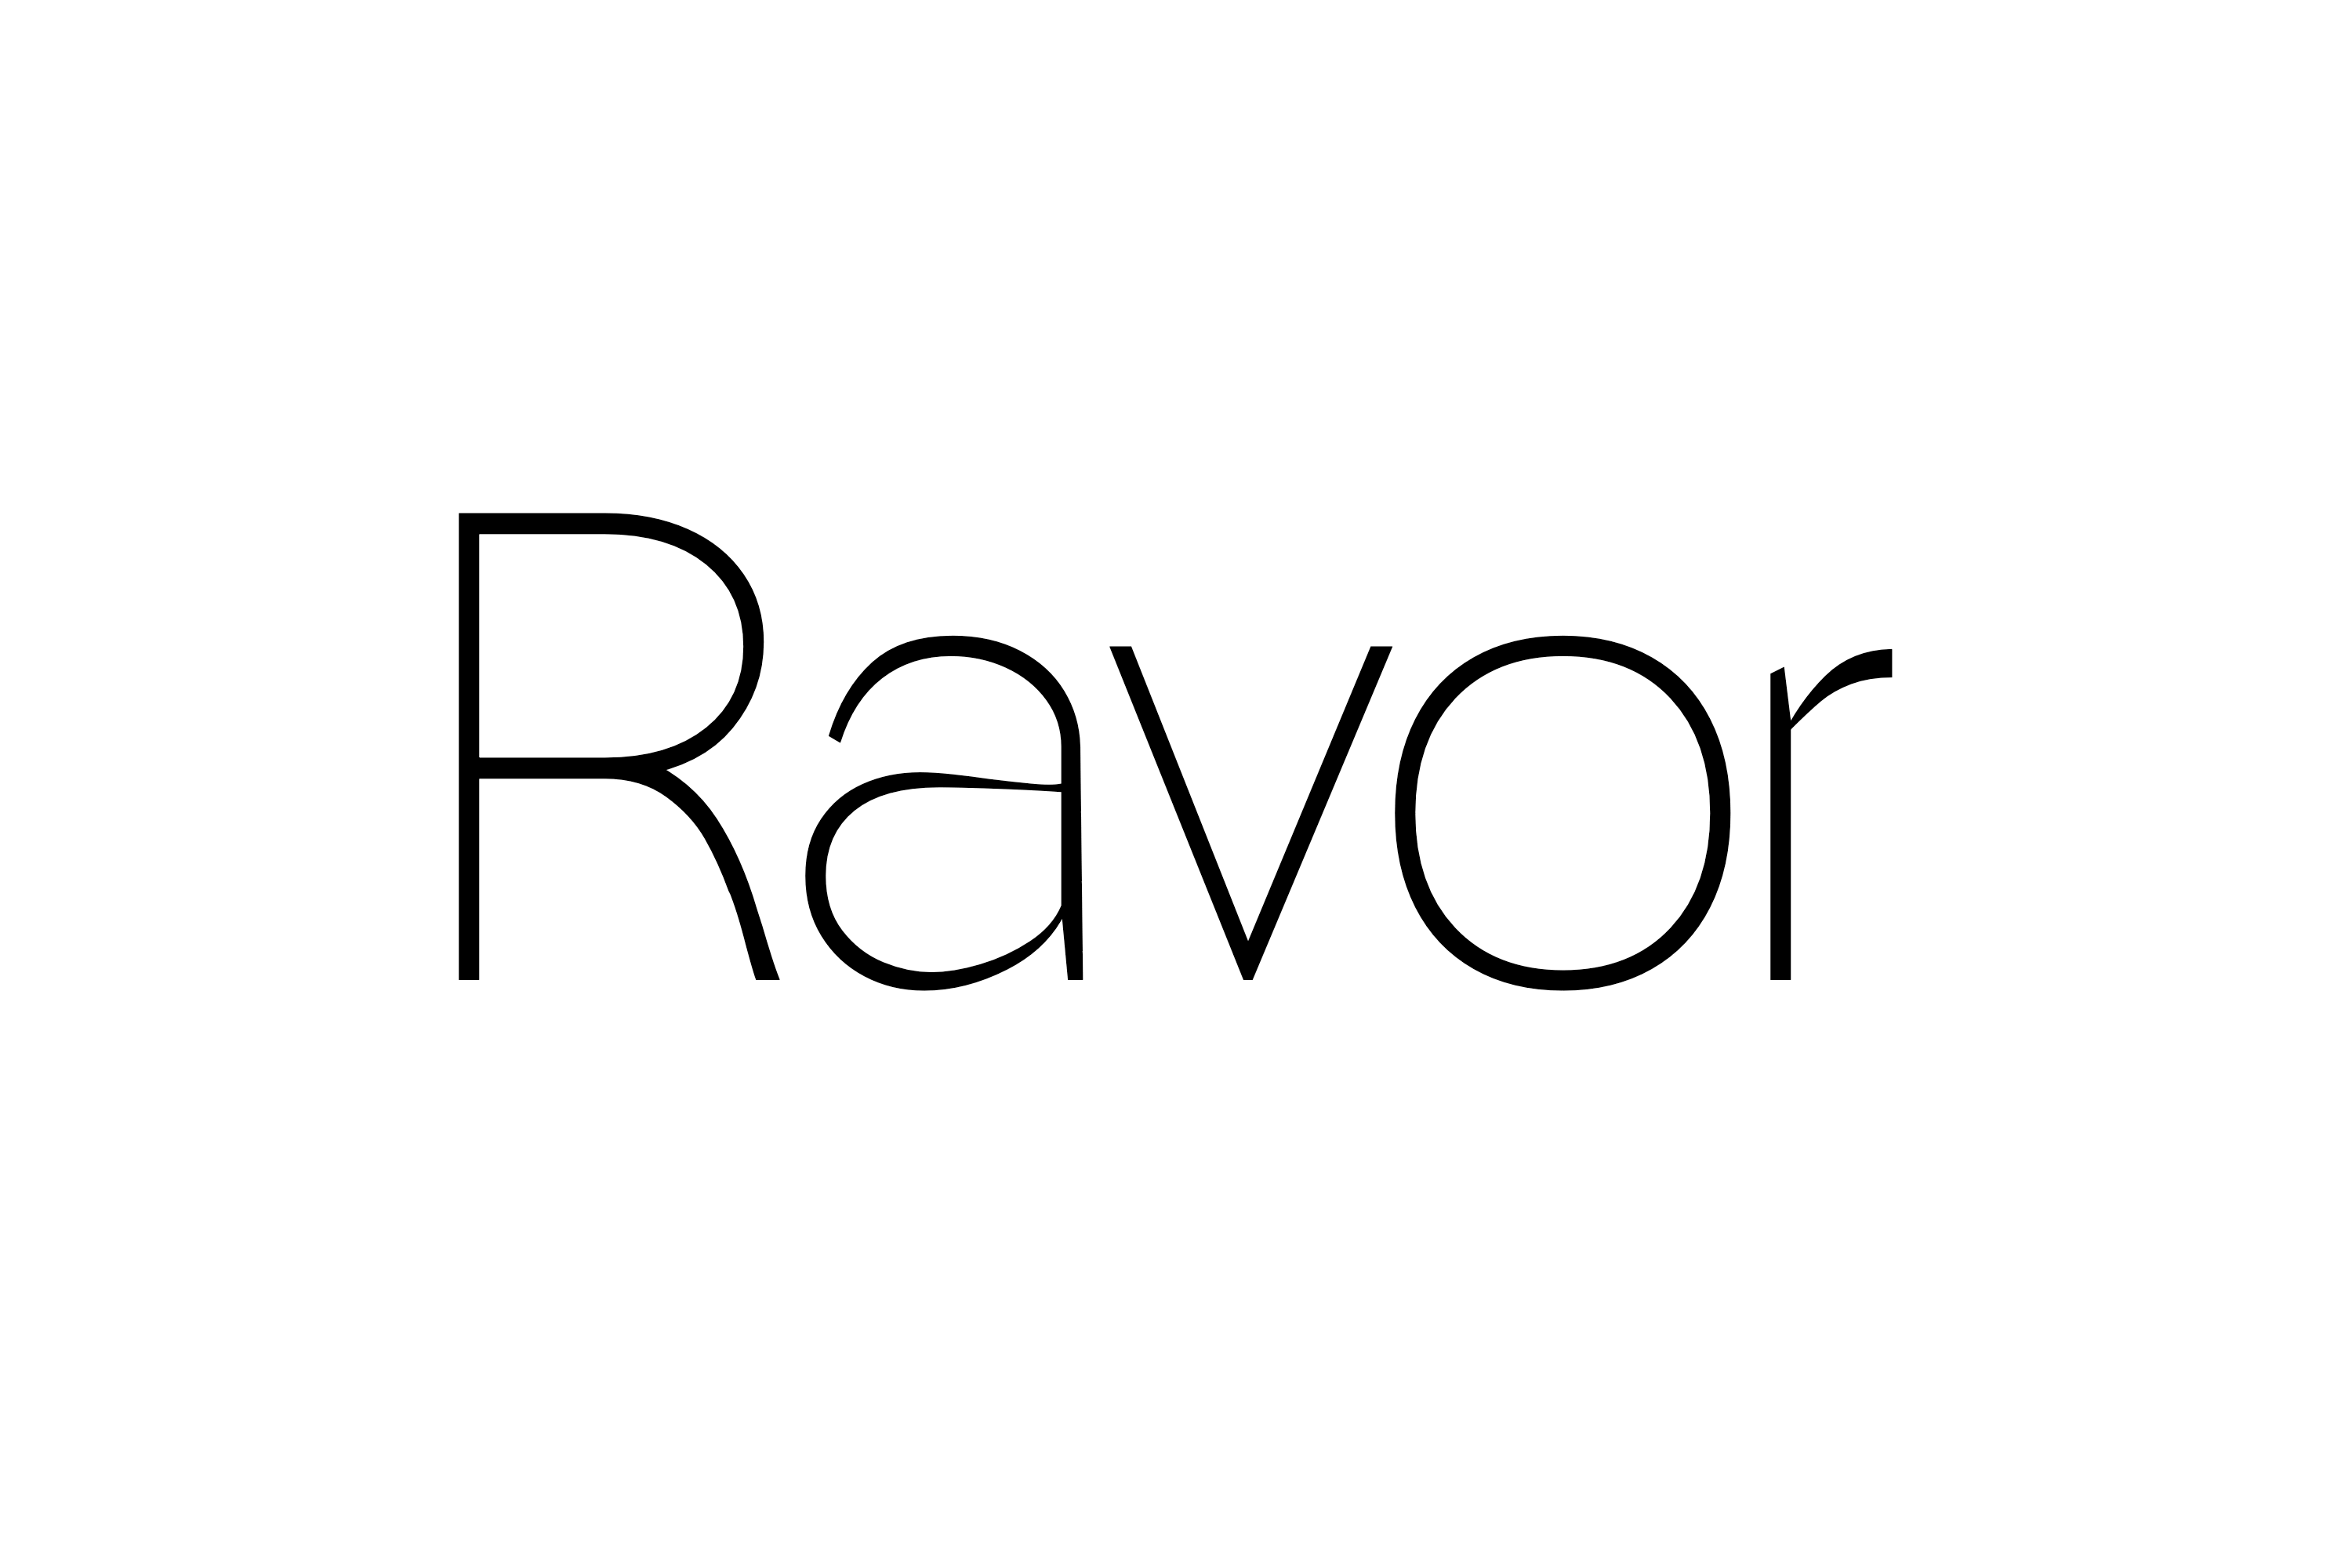 An animated gif of the typeface Ravor changing through all of its weights. From thin to heavy, and heavy back to thin.